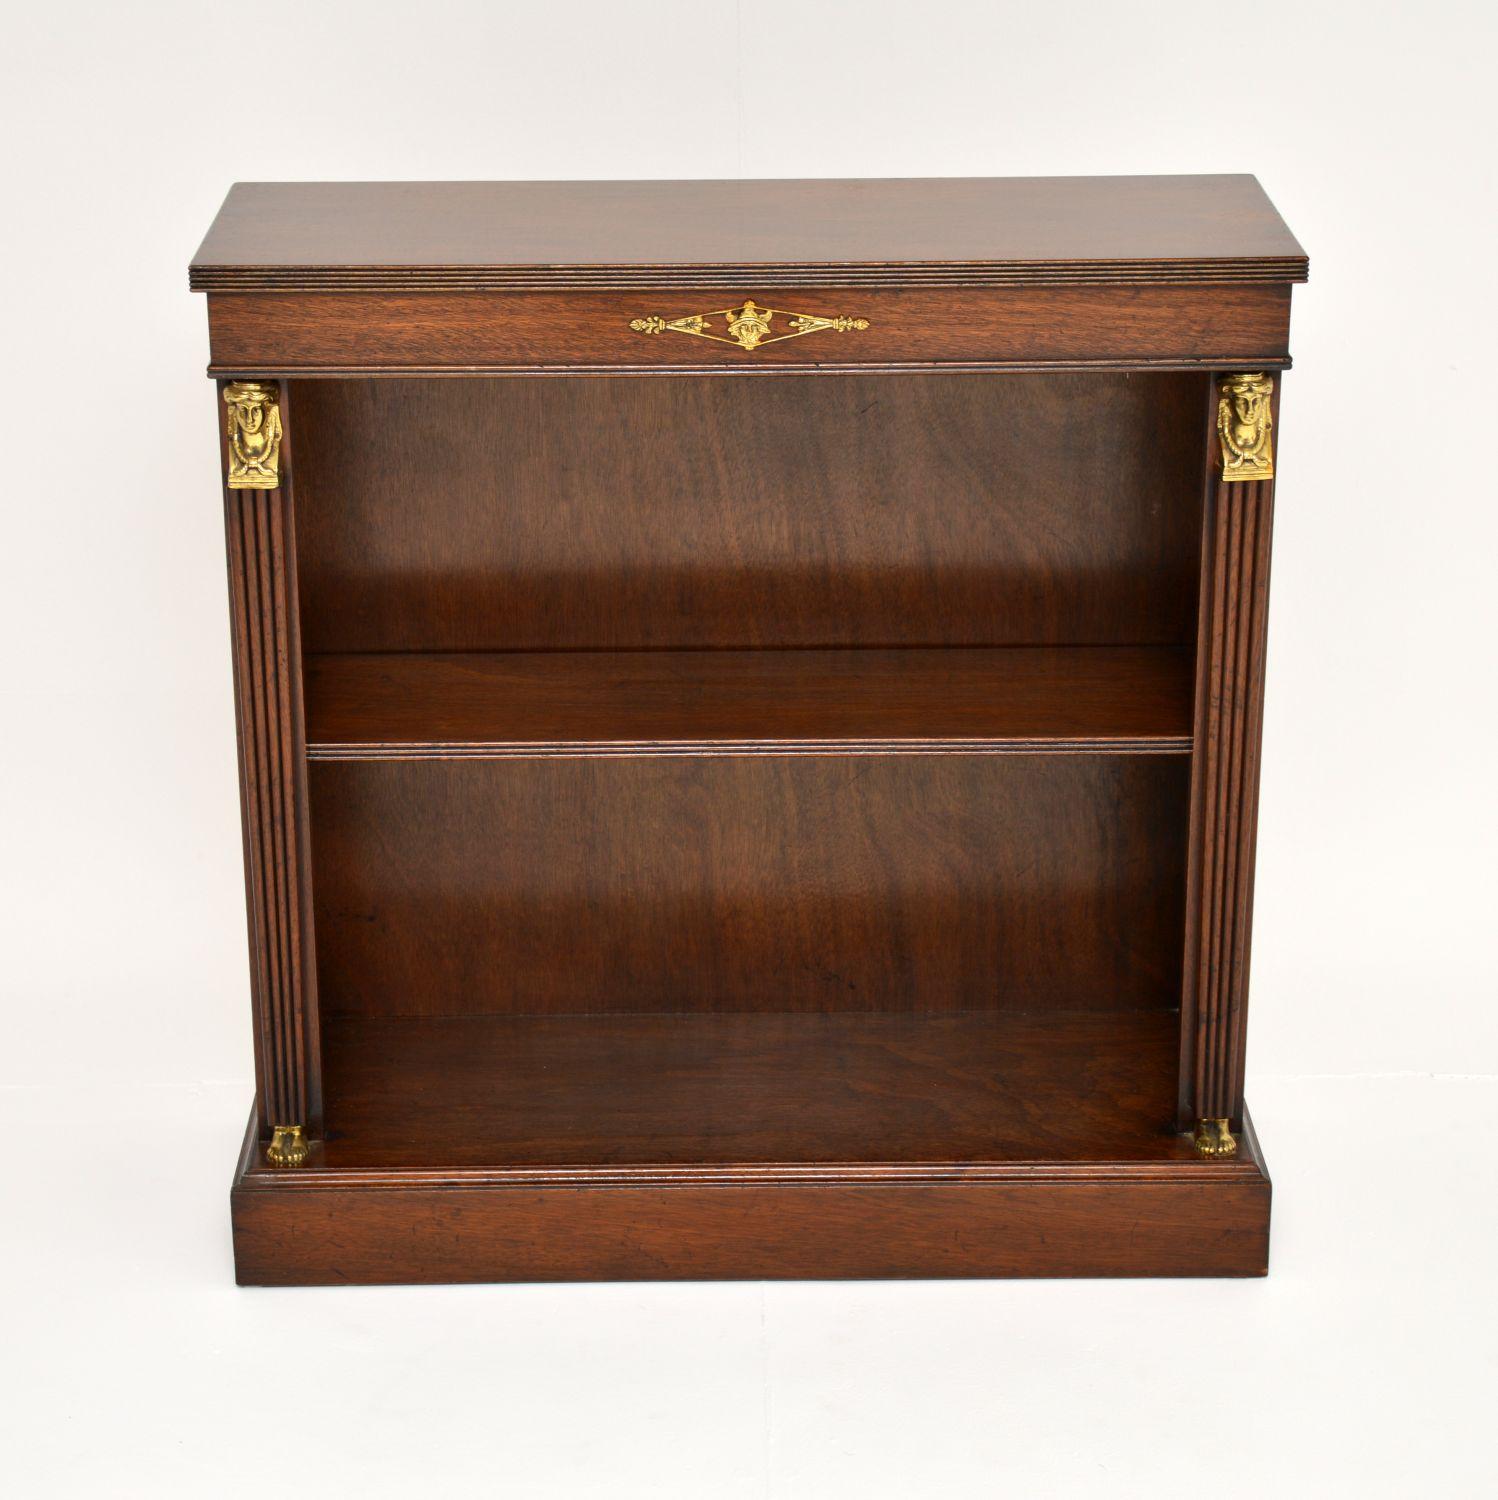 A lovely antique neoclassical Empire style wood open bookcase, dating from around the 1930-50’s period.

It has a reeded top edge and reeded tapered side columns, topped with gilt bronze faces with feet at the base. The shelf has a reeded front &